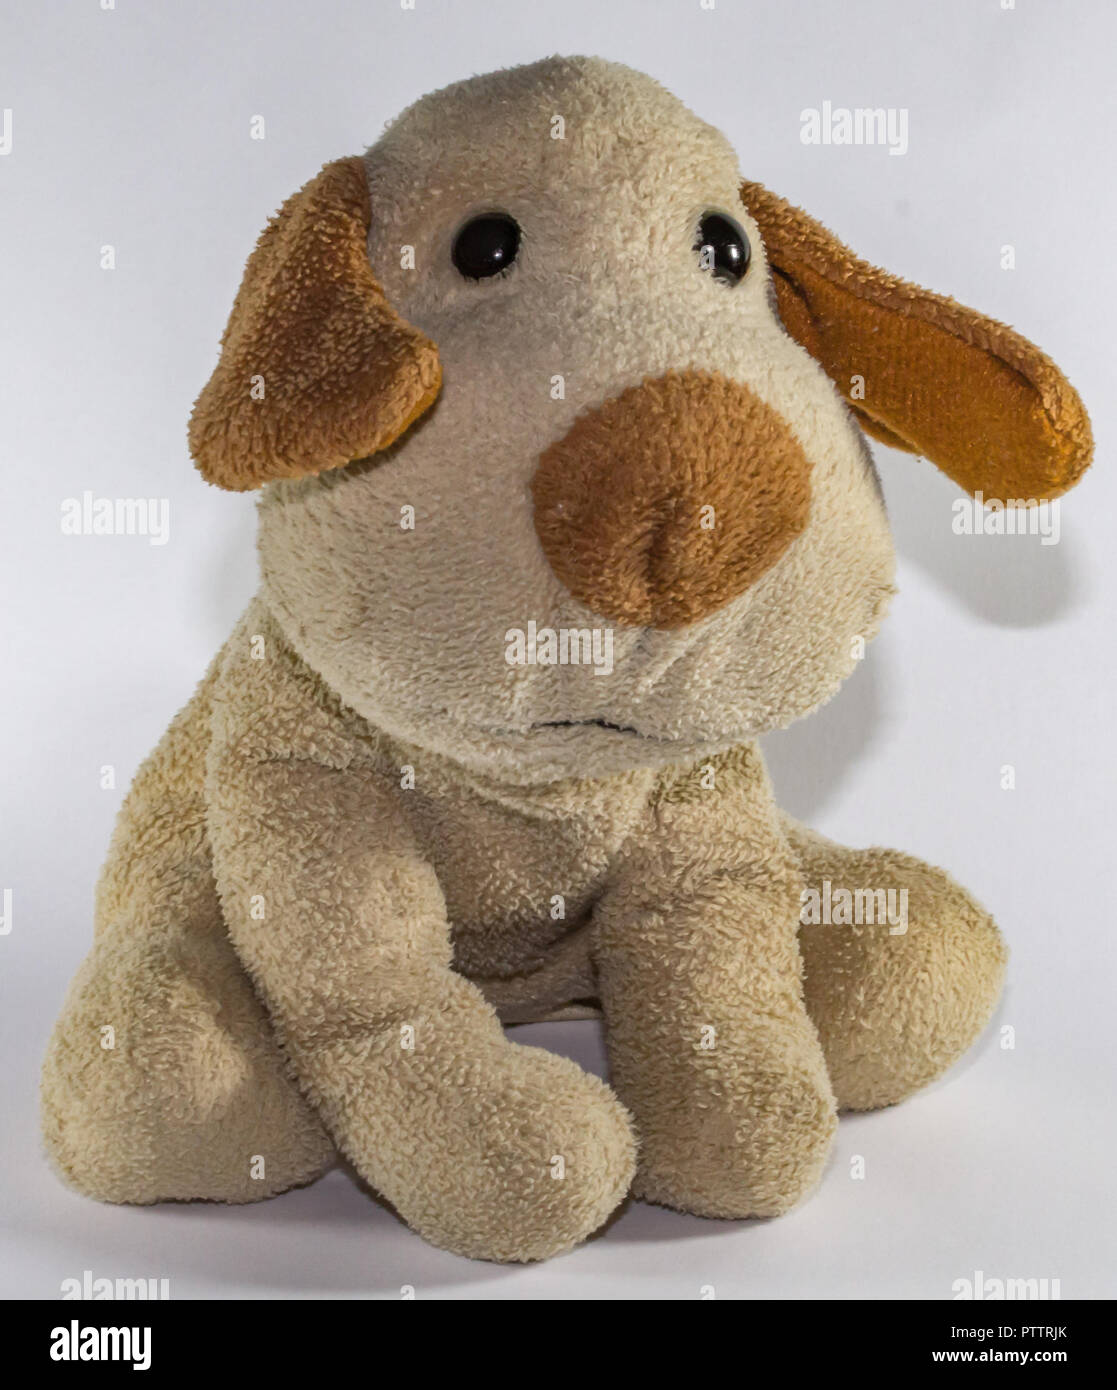 Plush dog, body in beige color and big ears in brown color, background in white color. Stock Photo